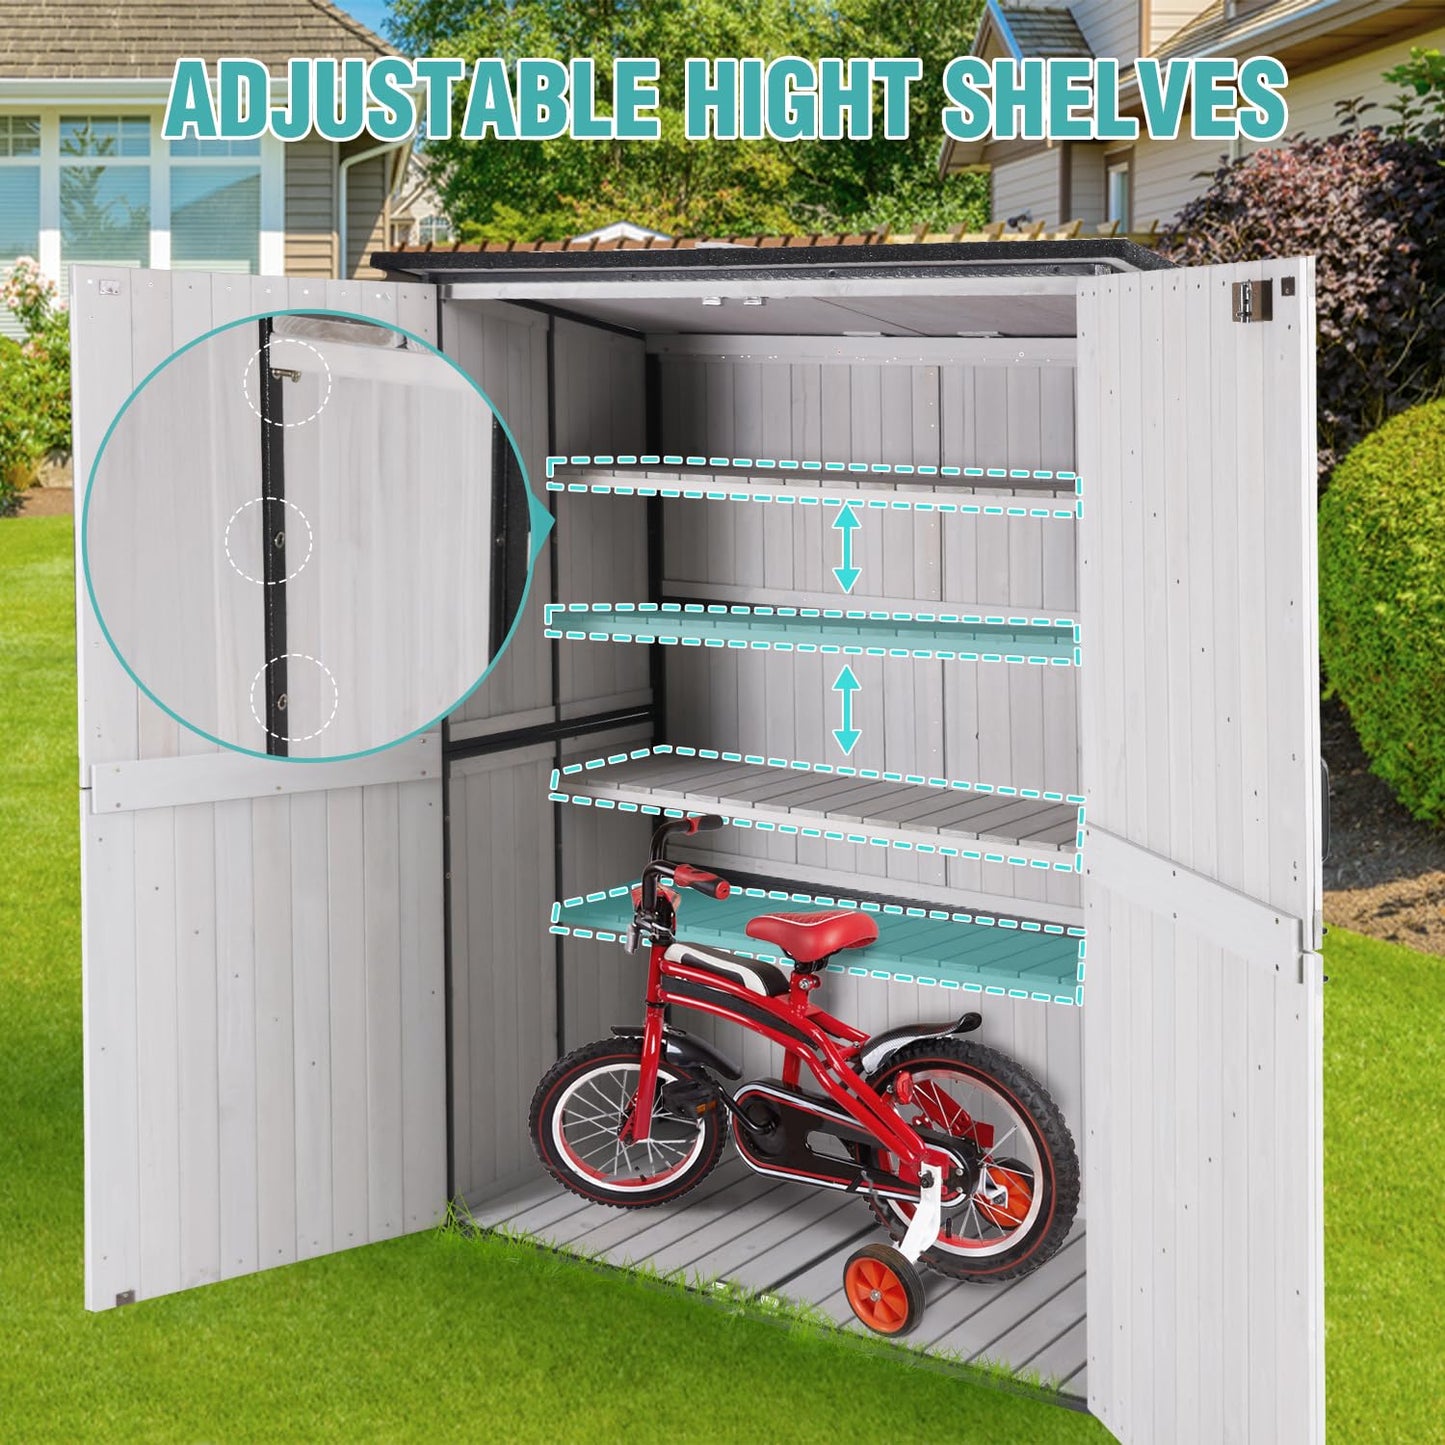 Sheds & Outdoor Storage,Large Garden Shed with Metal Frame Structure and Adjustable Shelves,Bike Storage Tool Cabinet Box for Backyard Garden Patio Lawn